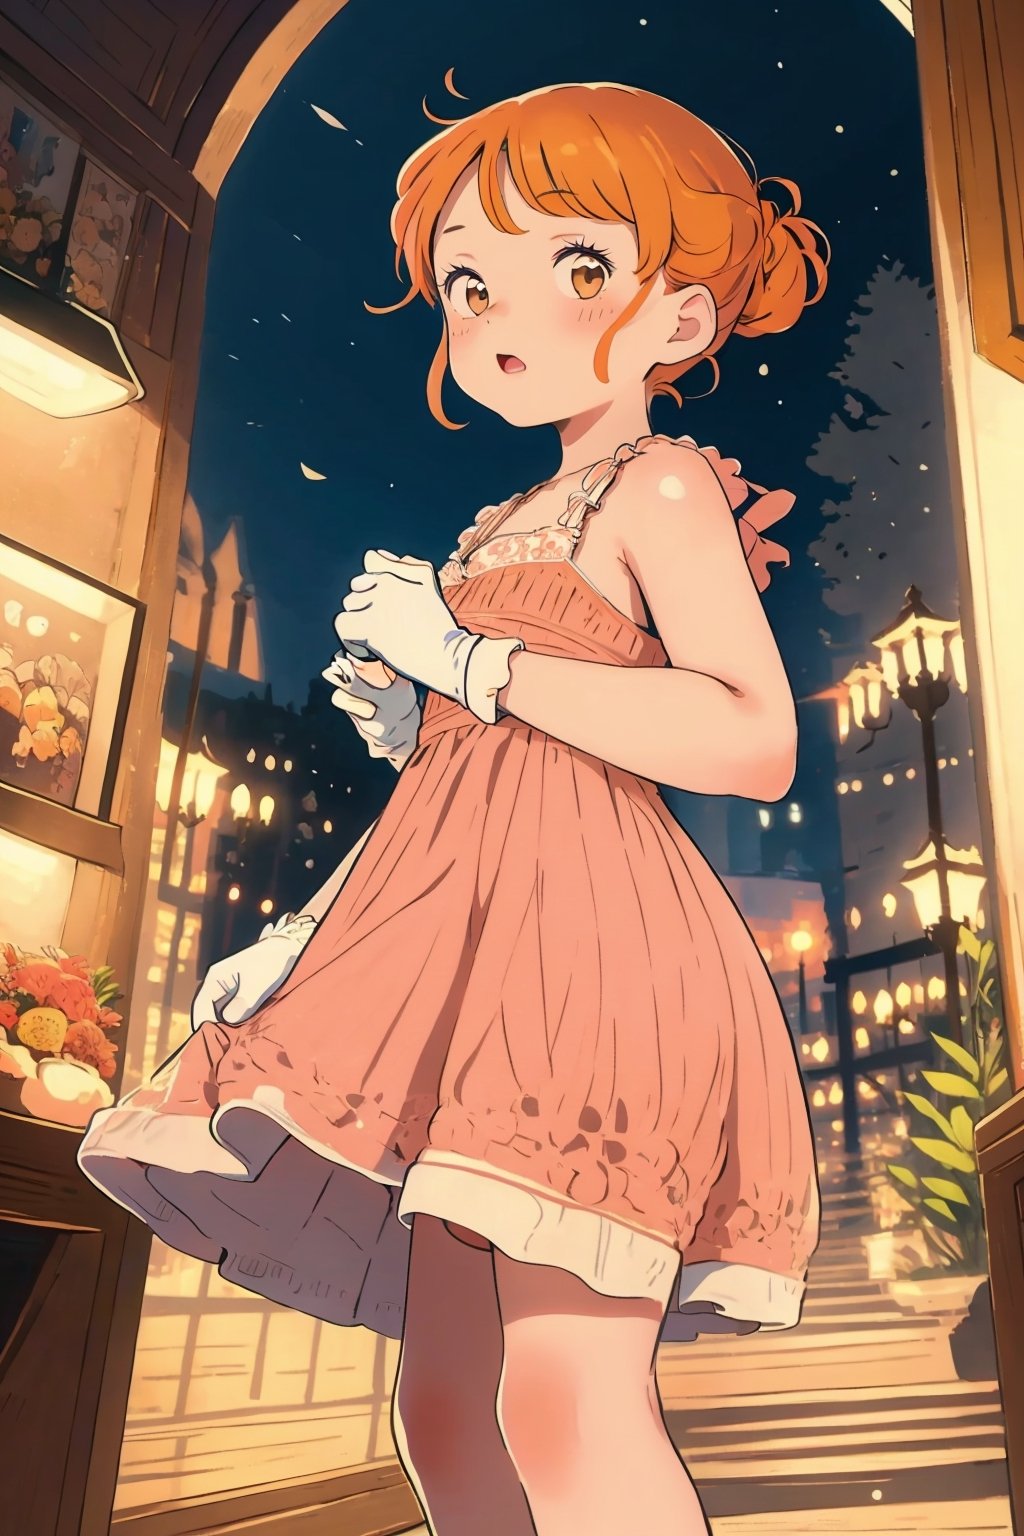 Imagine an adorable girl with wild short curly orange hair tied. Her eyes are a vivid, intense shade of green, sparkling with intricate detail. She has a warm, tanned complexion that adds to her charm. She wears a lovely pink dress with a delicate, cute touch, and her hands are adorned with white silk gloves. The background is a charming bar scene with dim lighting, creating a cozy ambiance. This artwork captures the essence of innocence and cuteness against the backdrop of a beautiful yet dimly lit setting, detailed, detail_eyes, detailed_hair, detailed_scenario, detailed_hands, detailed_background.